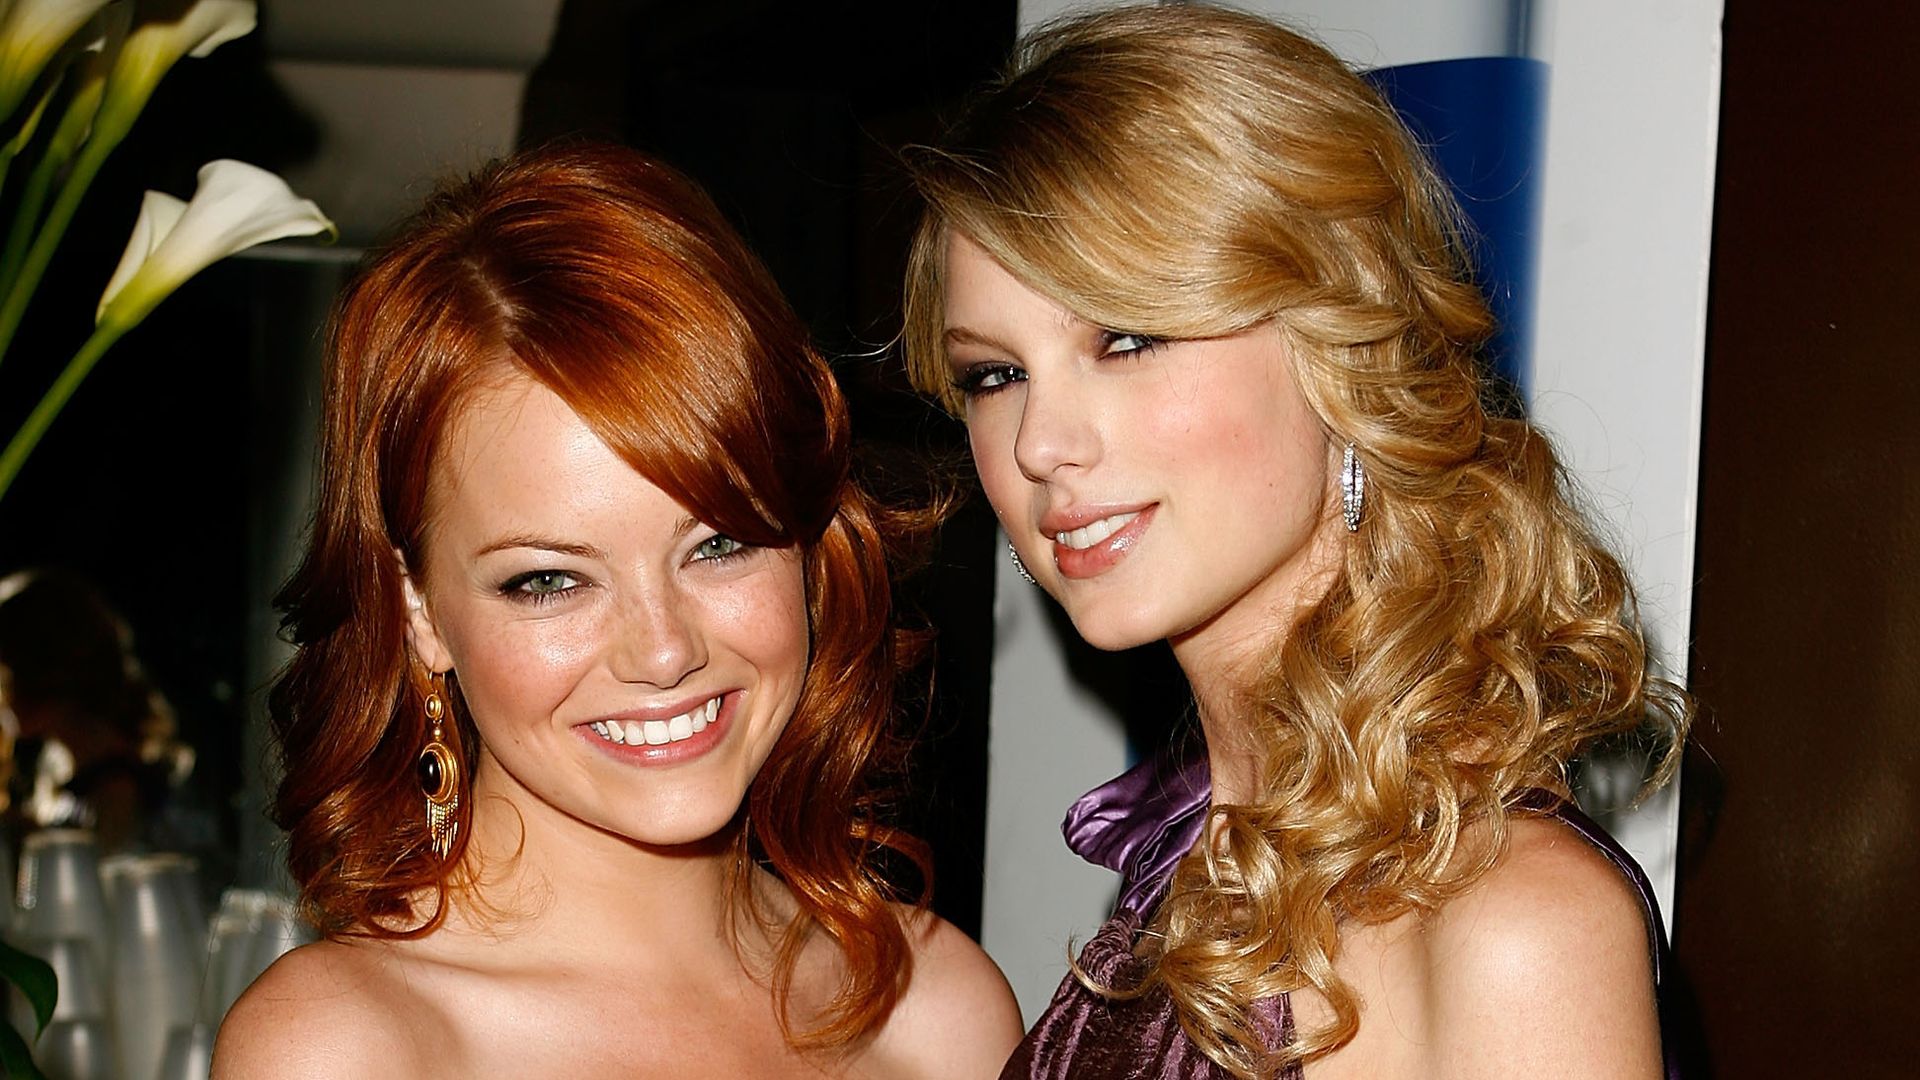 Emma Stone and singer Taylor Swift during cocktails at Hollywood Life Magazine?s 10th Annual Young Hollywood Awards at the Avalon on April 27, 2008 in Los Angeles, California